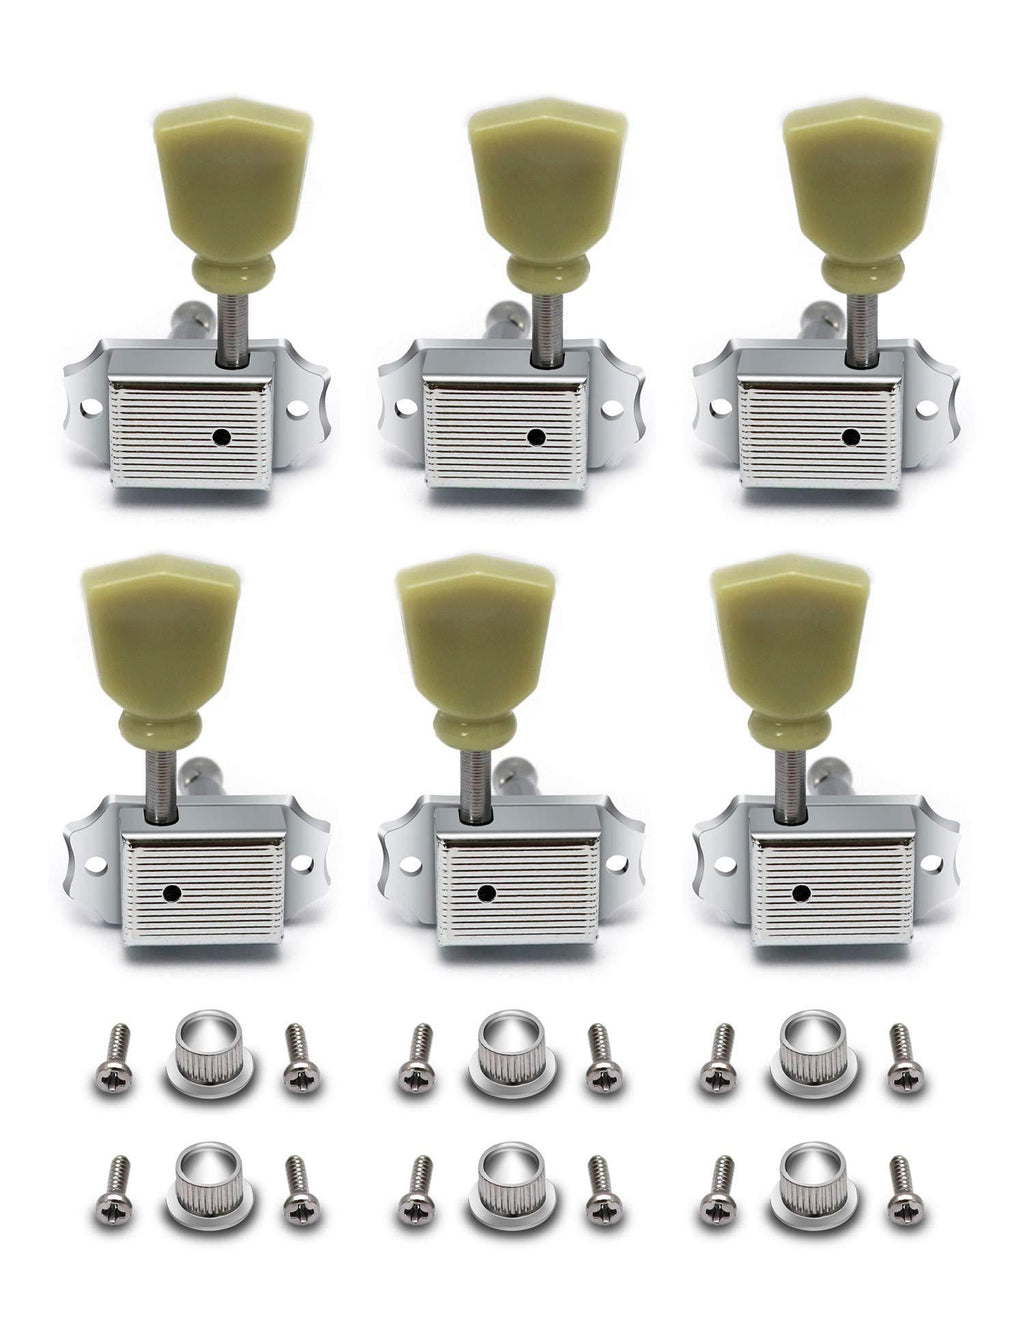 Metallor Vintage Guitar String Tuning Pegs Tuning Machines Tuning Keys Machines Heads Tuners Compatible with Les Paul LP SG Style Electric Guitar 3 Left 3 Right, Chrome with Tulip Button.